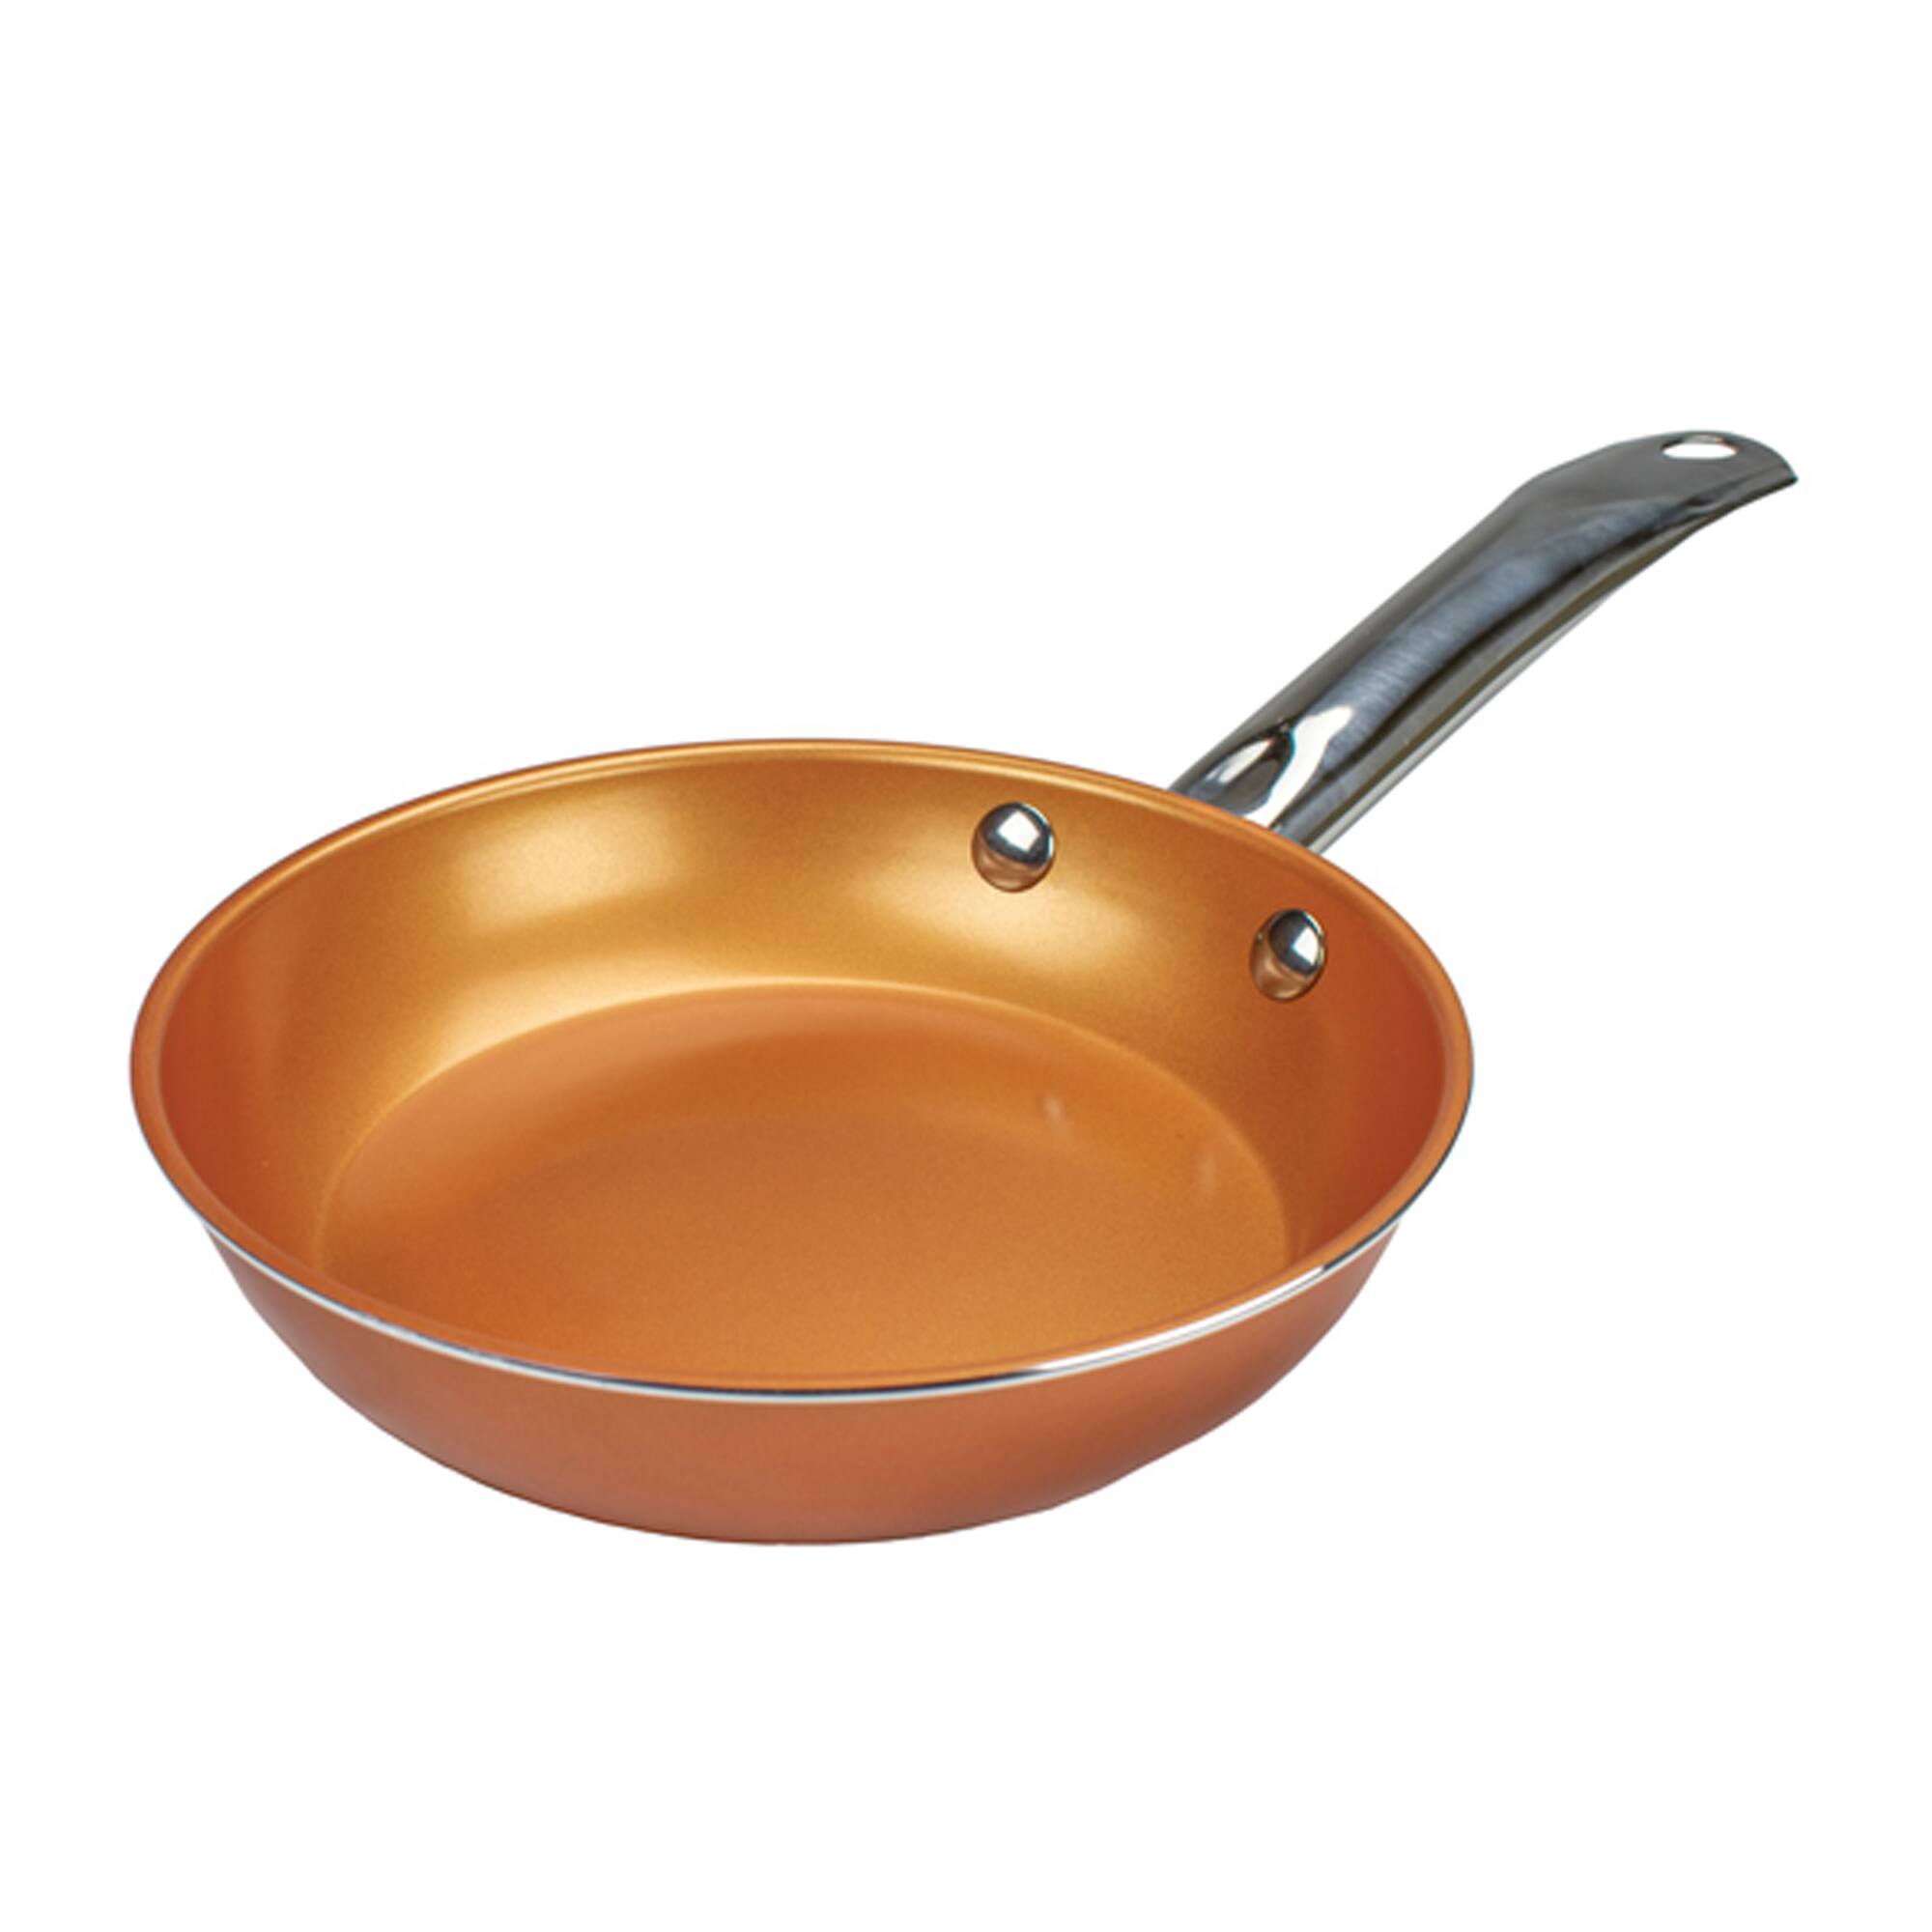 Brentwood 10 Nonstick Induction Copper Frying Pan